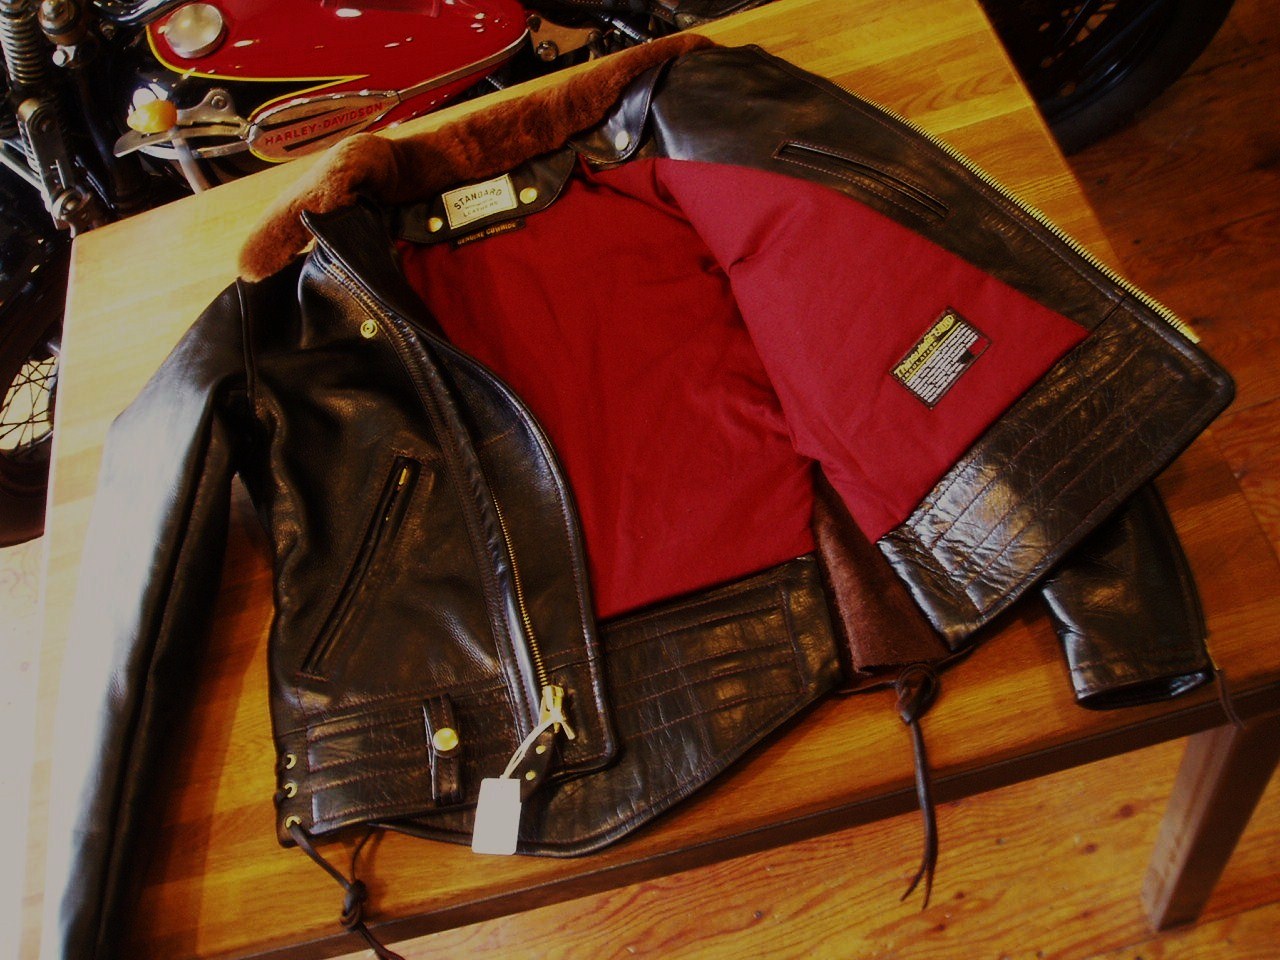 SWING-UP: STANDARD MOTORCYCLE LEATHERS